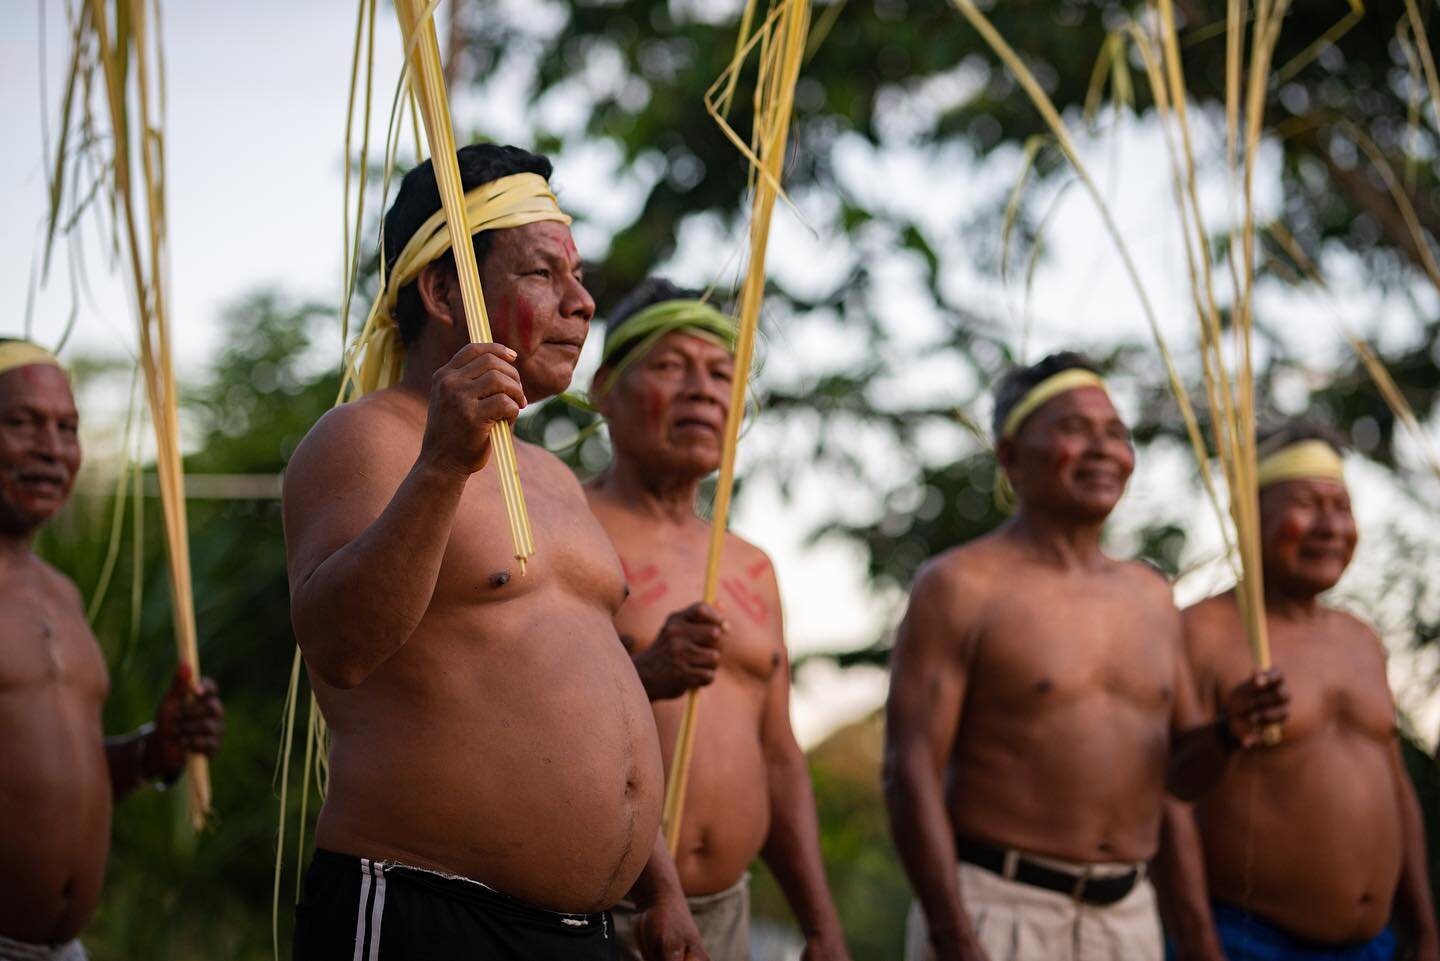 Maijuna elders gathering for the bee dance and chant, practiced for generations during the yuca harvest festival, inspired by mimicking stingless bees. &nbsp;
&nbsp;
OnePlanet&rsquo;s mission is to support the Maijuna in their goals of biocultural co